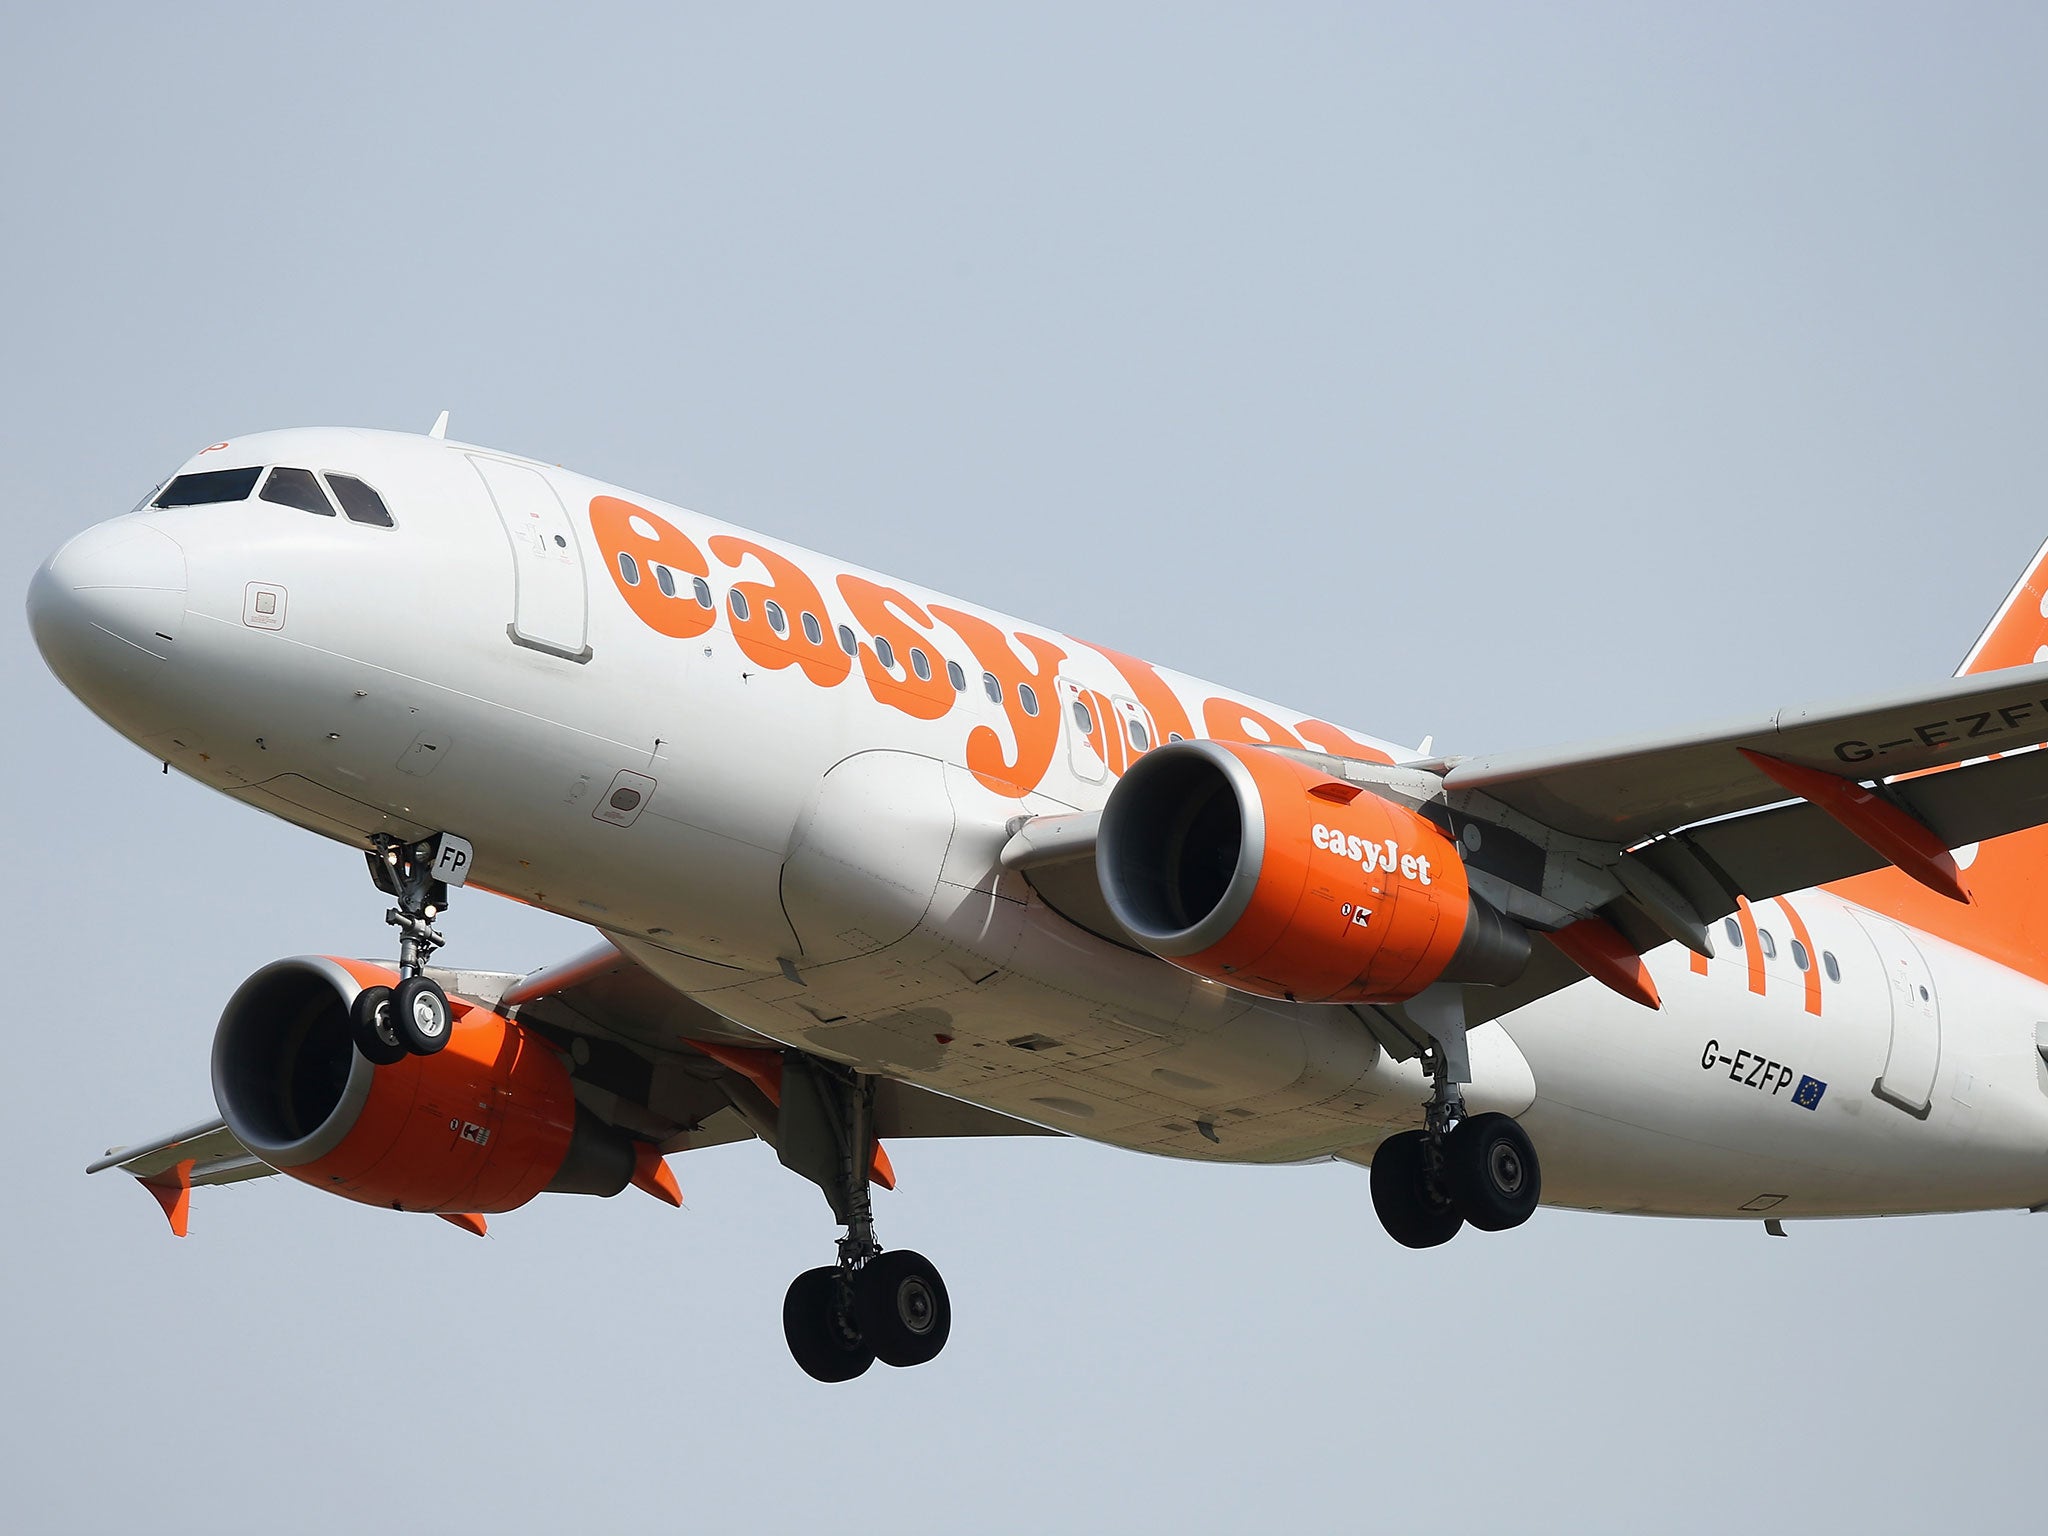 EasyJet boss Carolyn McCall warns price of flights could go up if the UK leaves the EU